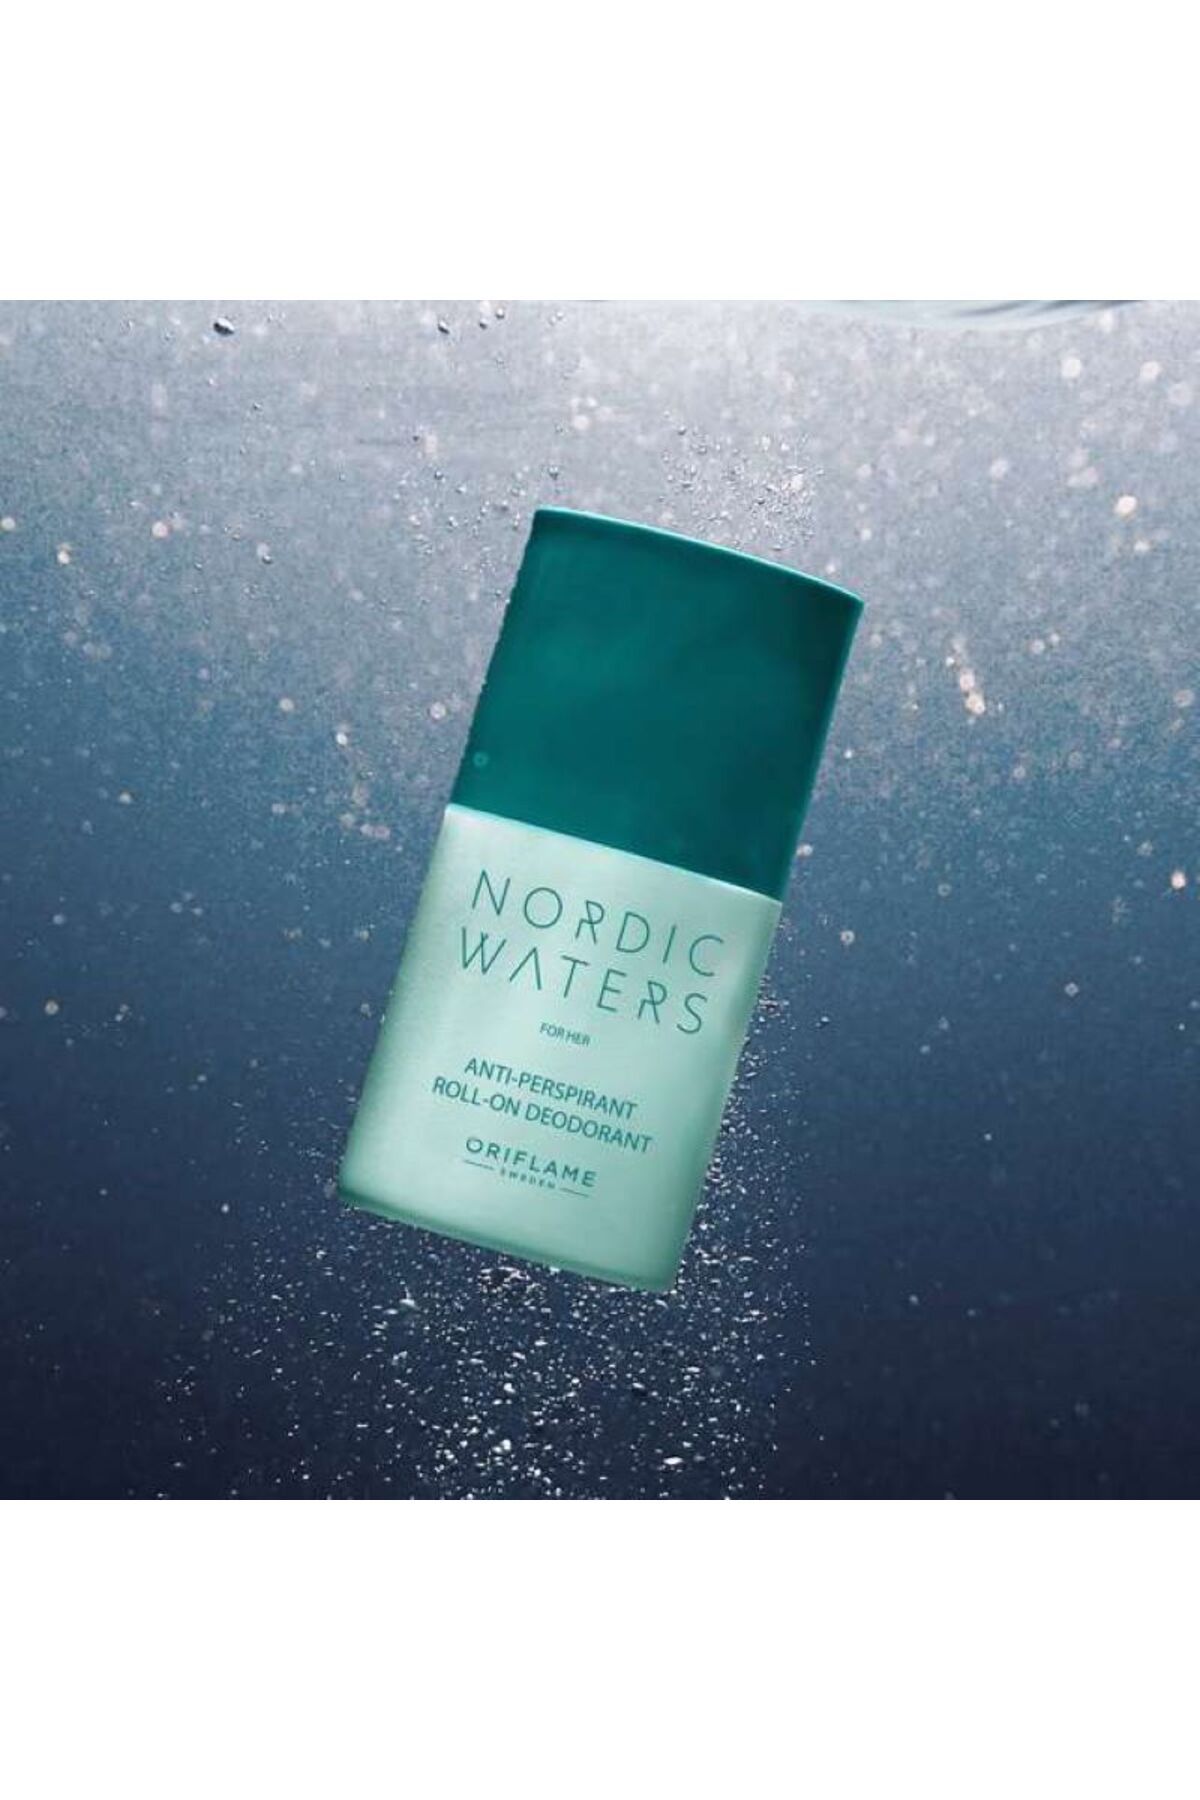 Oriflame Nordic Waters for her Anti-perspirant Roll-On Deodorant